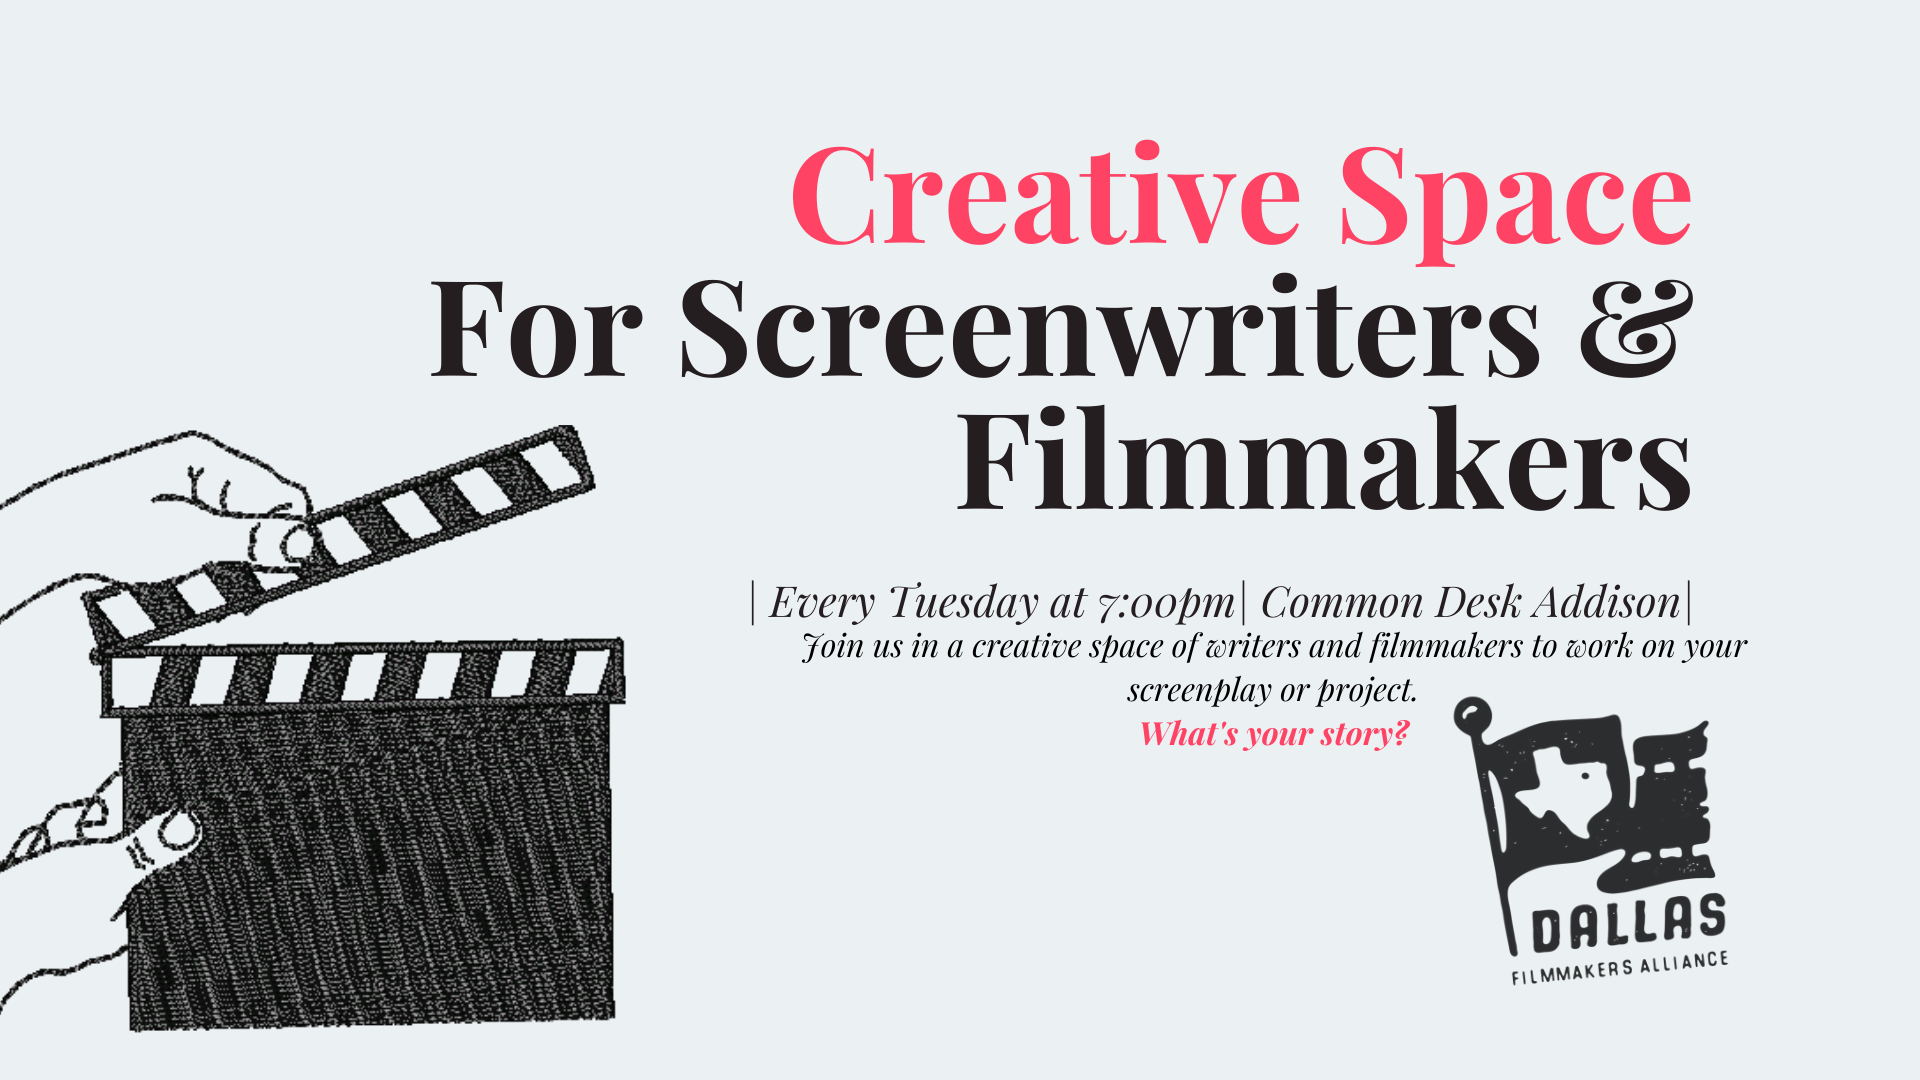 Creative Space for Screenwriters & Filmmakers